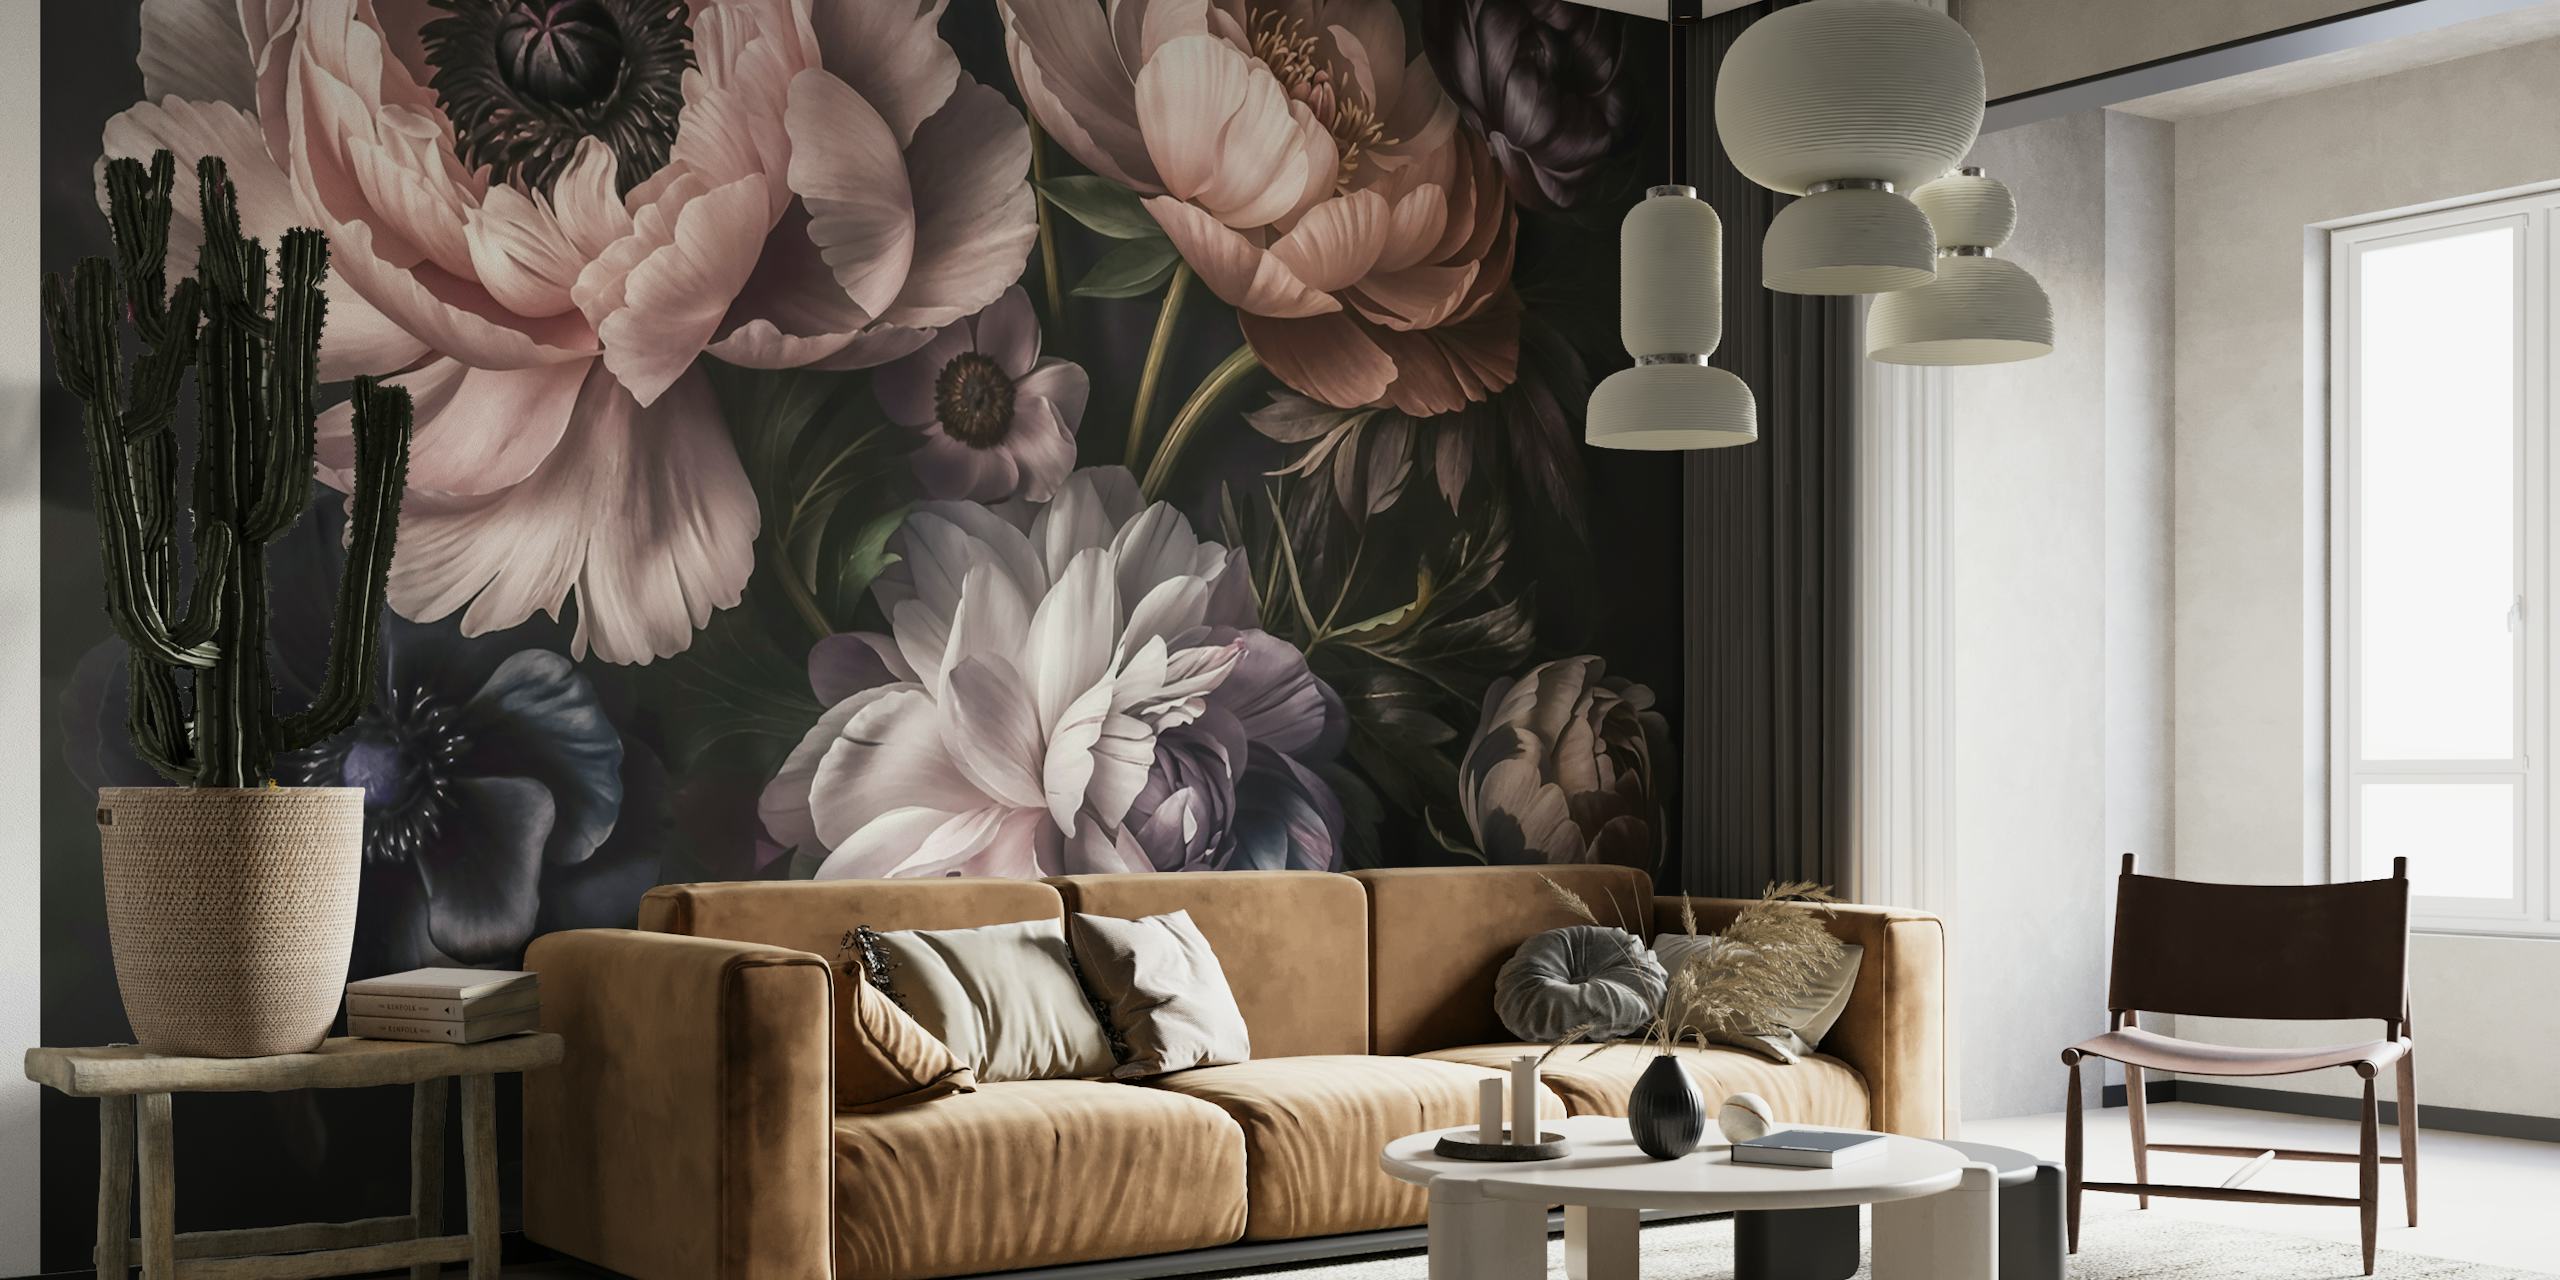 Dark moody baroque floral wall mural with smoky pink and peach blooms